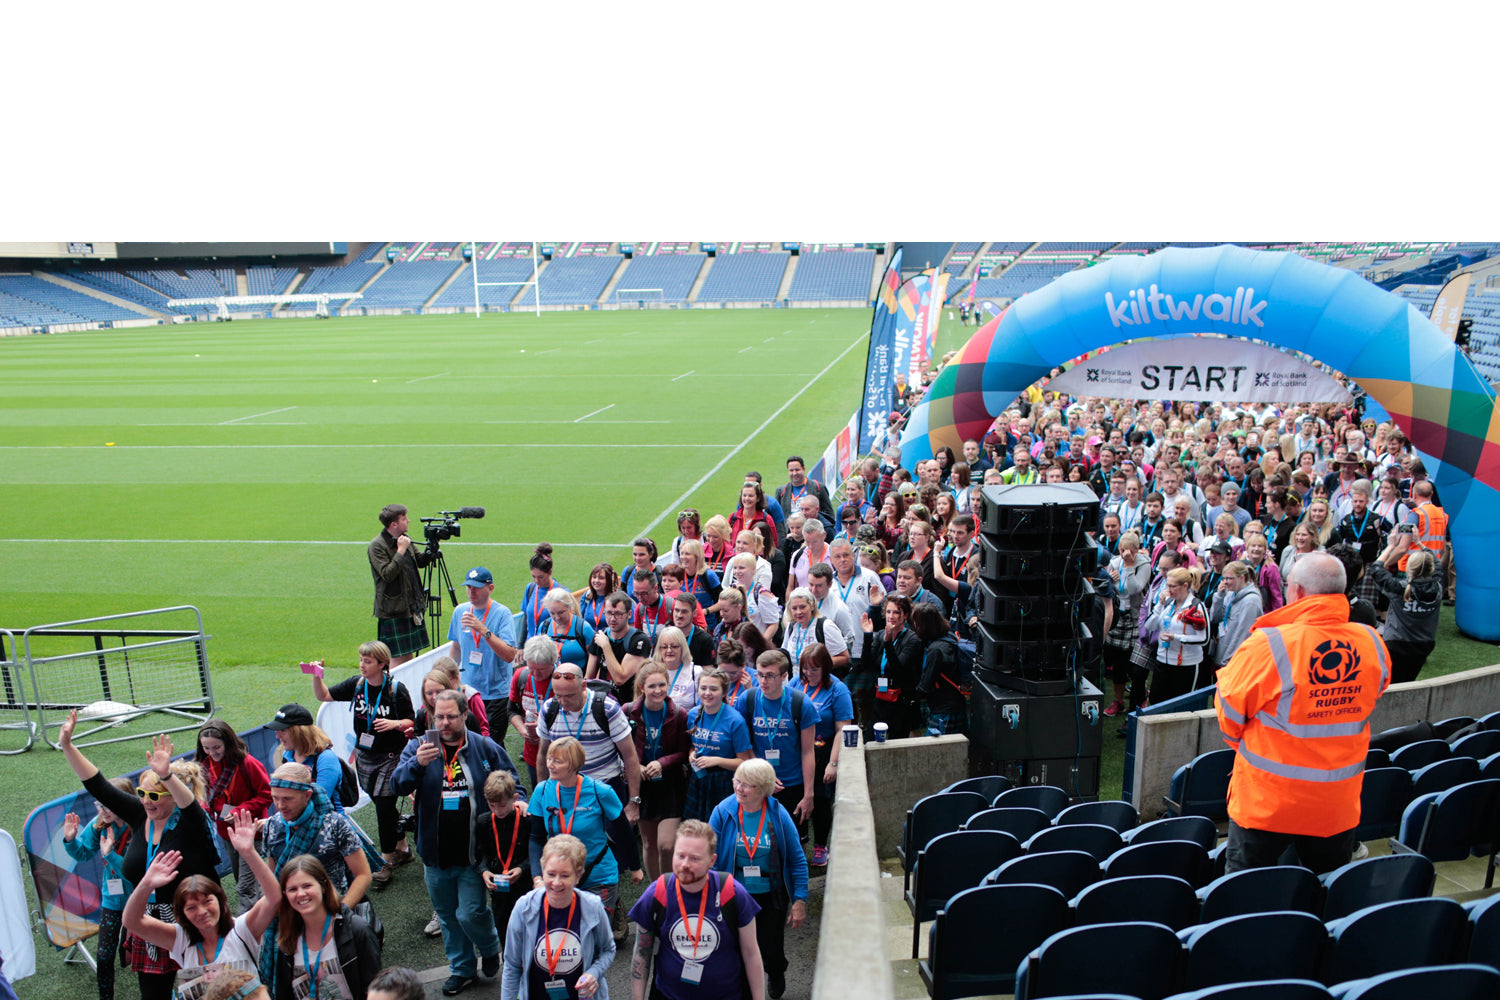 Crowds gather at the start of the Kiltwalk at Murrayfield